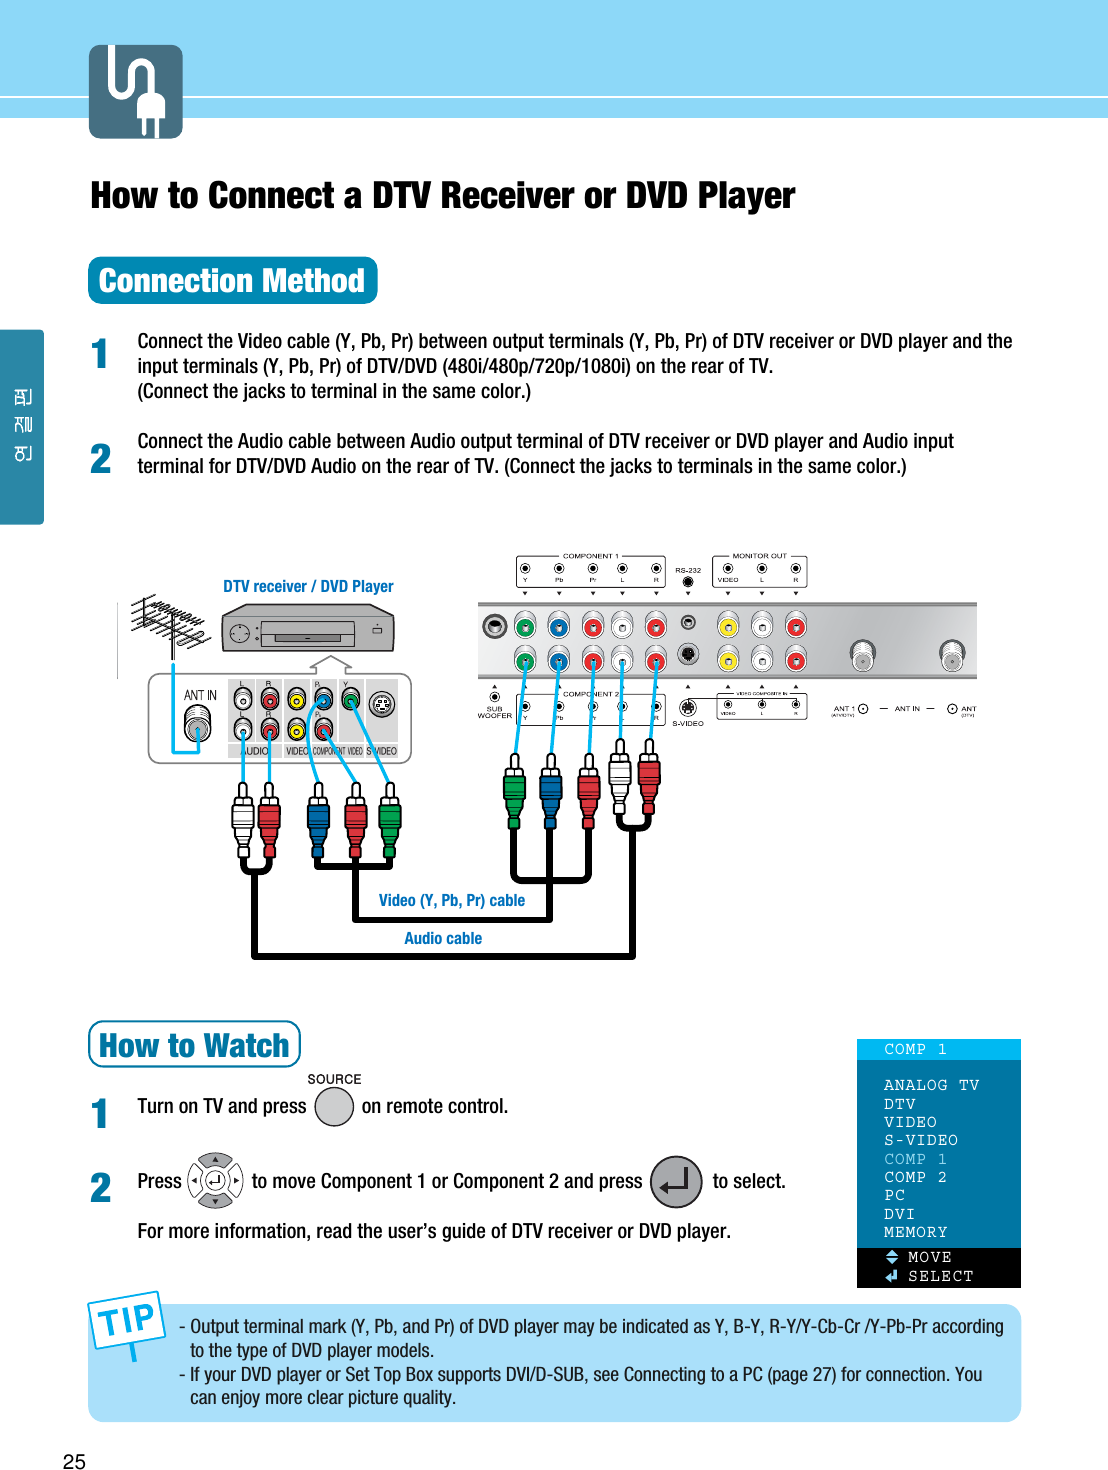 25How to Connect a DTV Receiver or DVD PlayerConnection MethodConnect the Video cable (Y, Pb, Pr) between output terminals (Y, Pb, Pr) of DTV receiver or DVD player and theinput terminals (Y, Pb, Pr) of DTV/DVD (480i/480p/720p/1080i) on the rear of TV. (Connect the jacks to terminal in the same color.)Connect the Audio cable between Audio output terminal of DTV receiver or DVD player and Audio inputterminal for DTV/DVD Audio on the rear of TV. (Connect the jacks to terminals in the same color.)How to WatchTurn on TV and press           on remote control.Press              to move Component 1 or Component 2 and press              to select.For more information, read the user’s guide of DTV receiver or DVD player.1- Output terminal mark (Y, Pb, and Pr) of DVD player may be indicated as Y, B-Y, R-Y/Y-Cb-Cr /Y-Pb-Pr accordingto the type of DVD player models.- If your DVD player or Set Top Box supports DVI/D-SUB, see Connecting to a PC (page 27) for connection. Youcan enjoy more clear picture quality.12Audio cable2COMP 1ANALOG TVDTVVIDEOS-VIDEOCOMP 1COMP 2PCDVIMEMORYMOVESELECT)=,17&gt;1,-7 ;&gt;1,-7+75876-6&lt;&gt;1,-7Video (Y, Pb, Pr) cableDTV receiver / DVD Player